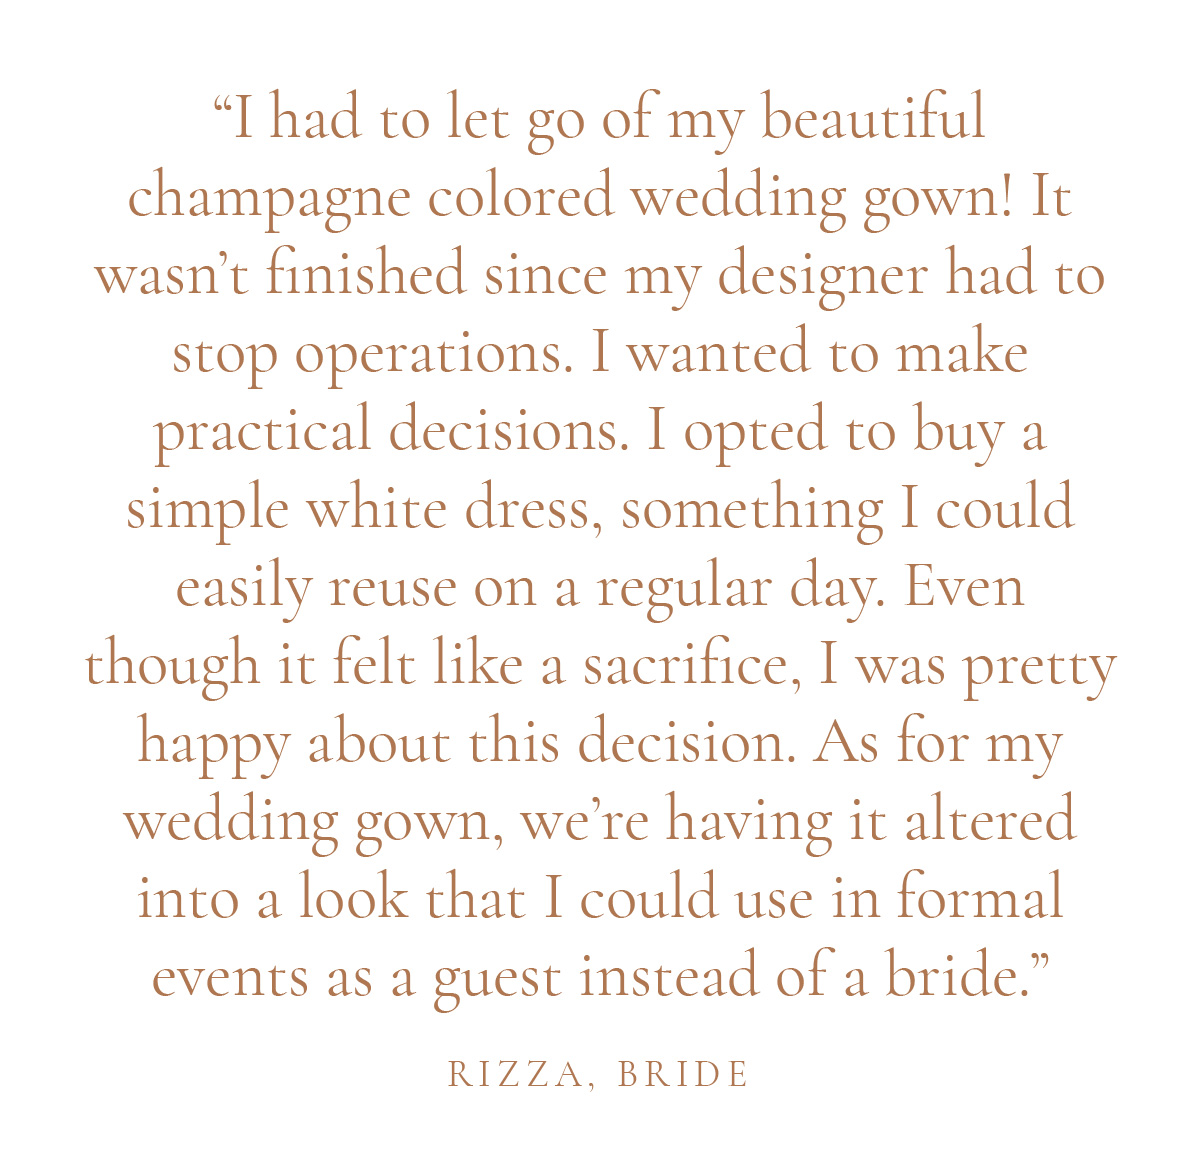 "I had to let go of my beautiful champagne colored wedding gown! It wasn't finished since my designer had to stop operations. I wanted to make practical decisions. I opted to buy a simple white dress, something I could easily reuse on a regular day. Even though it felt like a sacrifice, I was pretty happy about this decision. As for my wedding gown, we're having it altered into a look that I could use in formal events as a guest instead of a bride." - Rizza, Bride